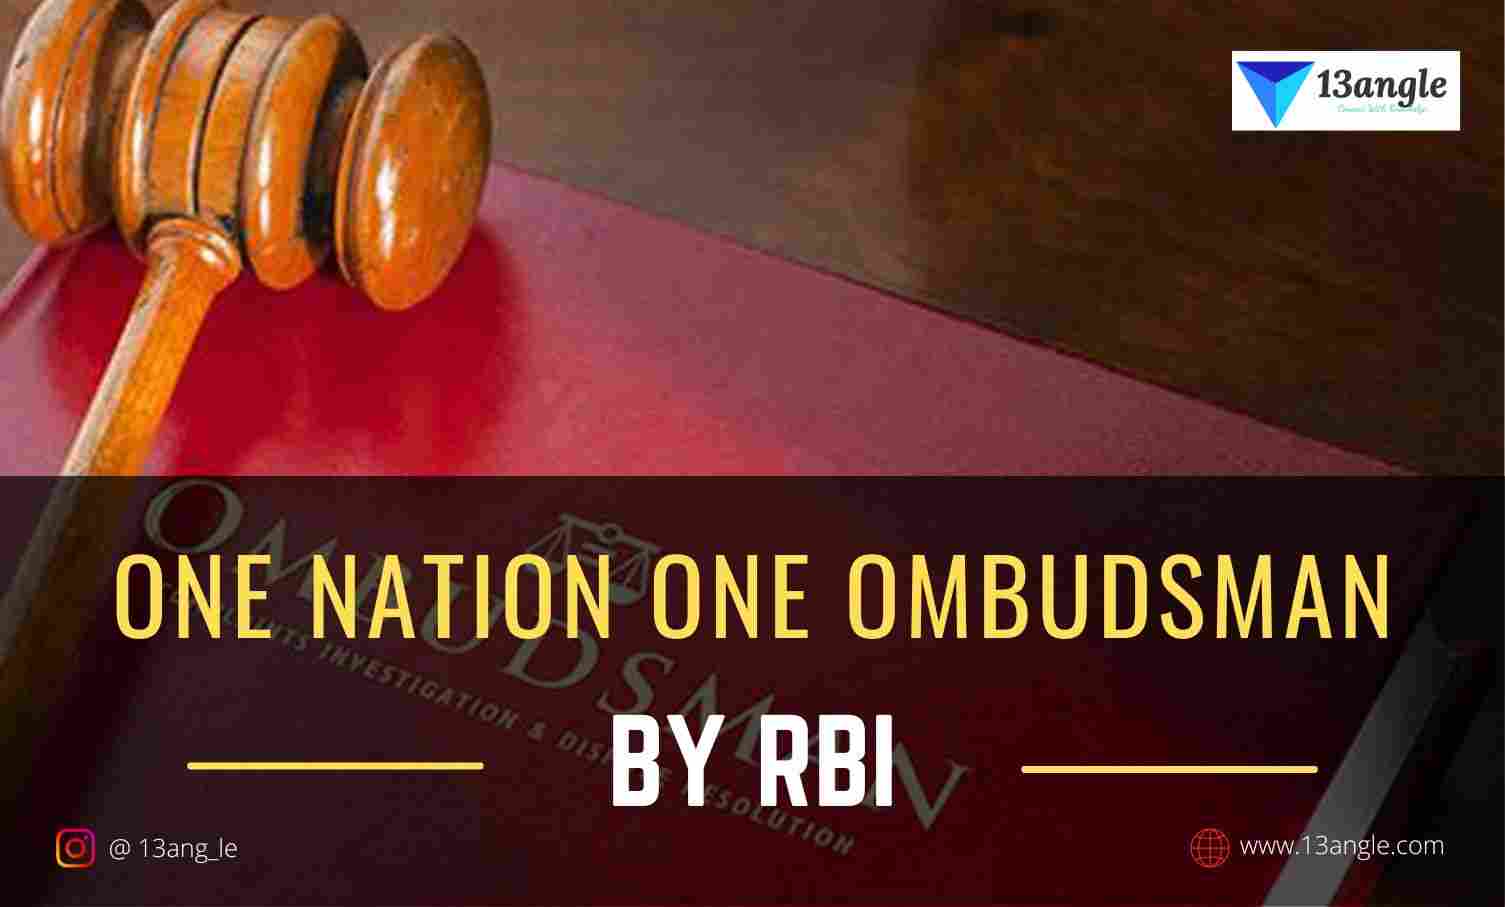 Short Notes On One Nation One Ombudsman By RBI- 13angle.com